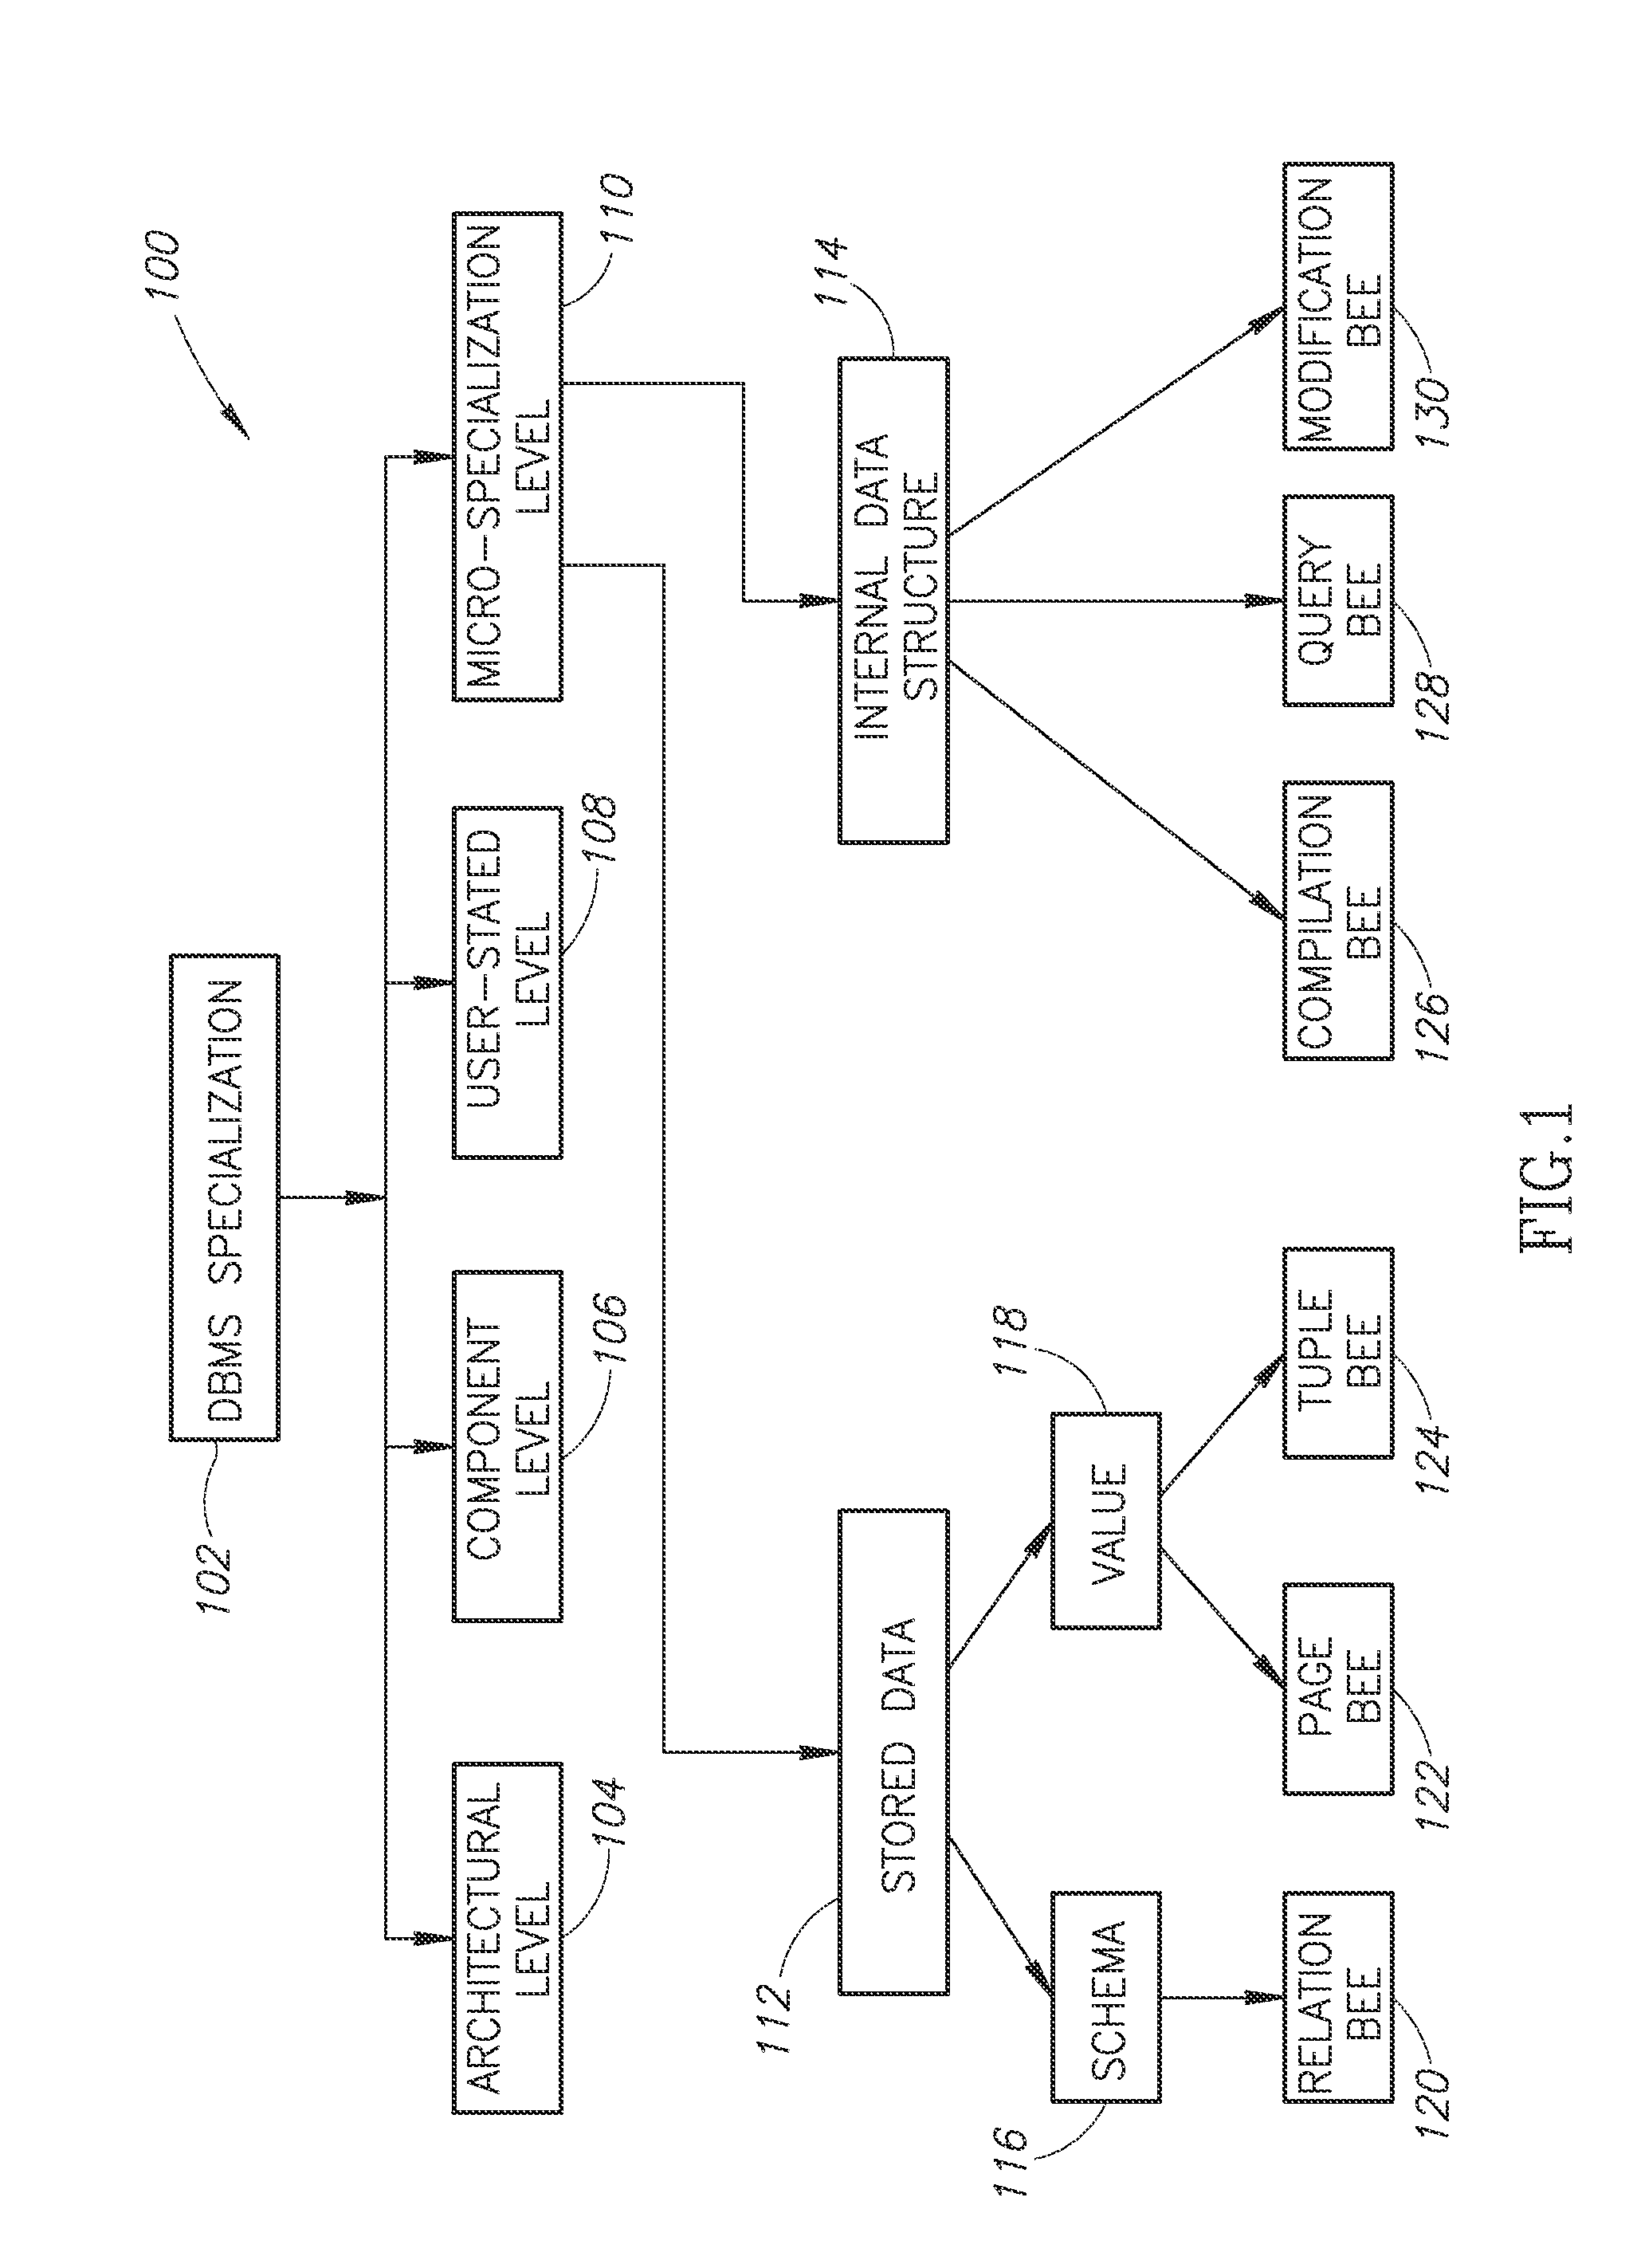 Methods of micro-specialization in database management systems